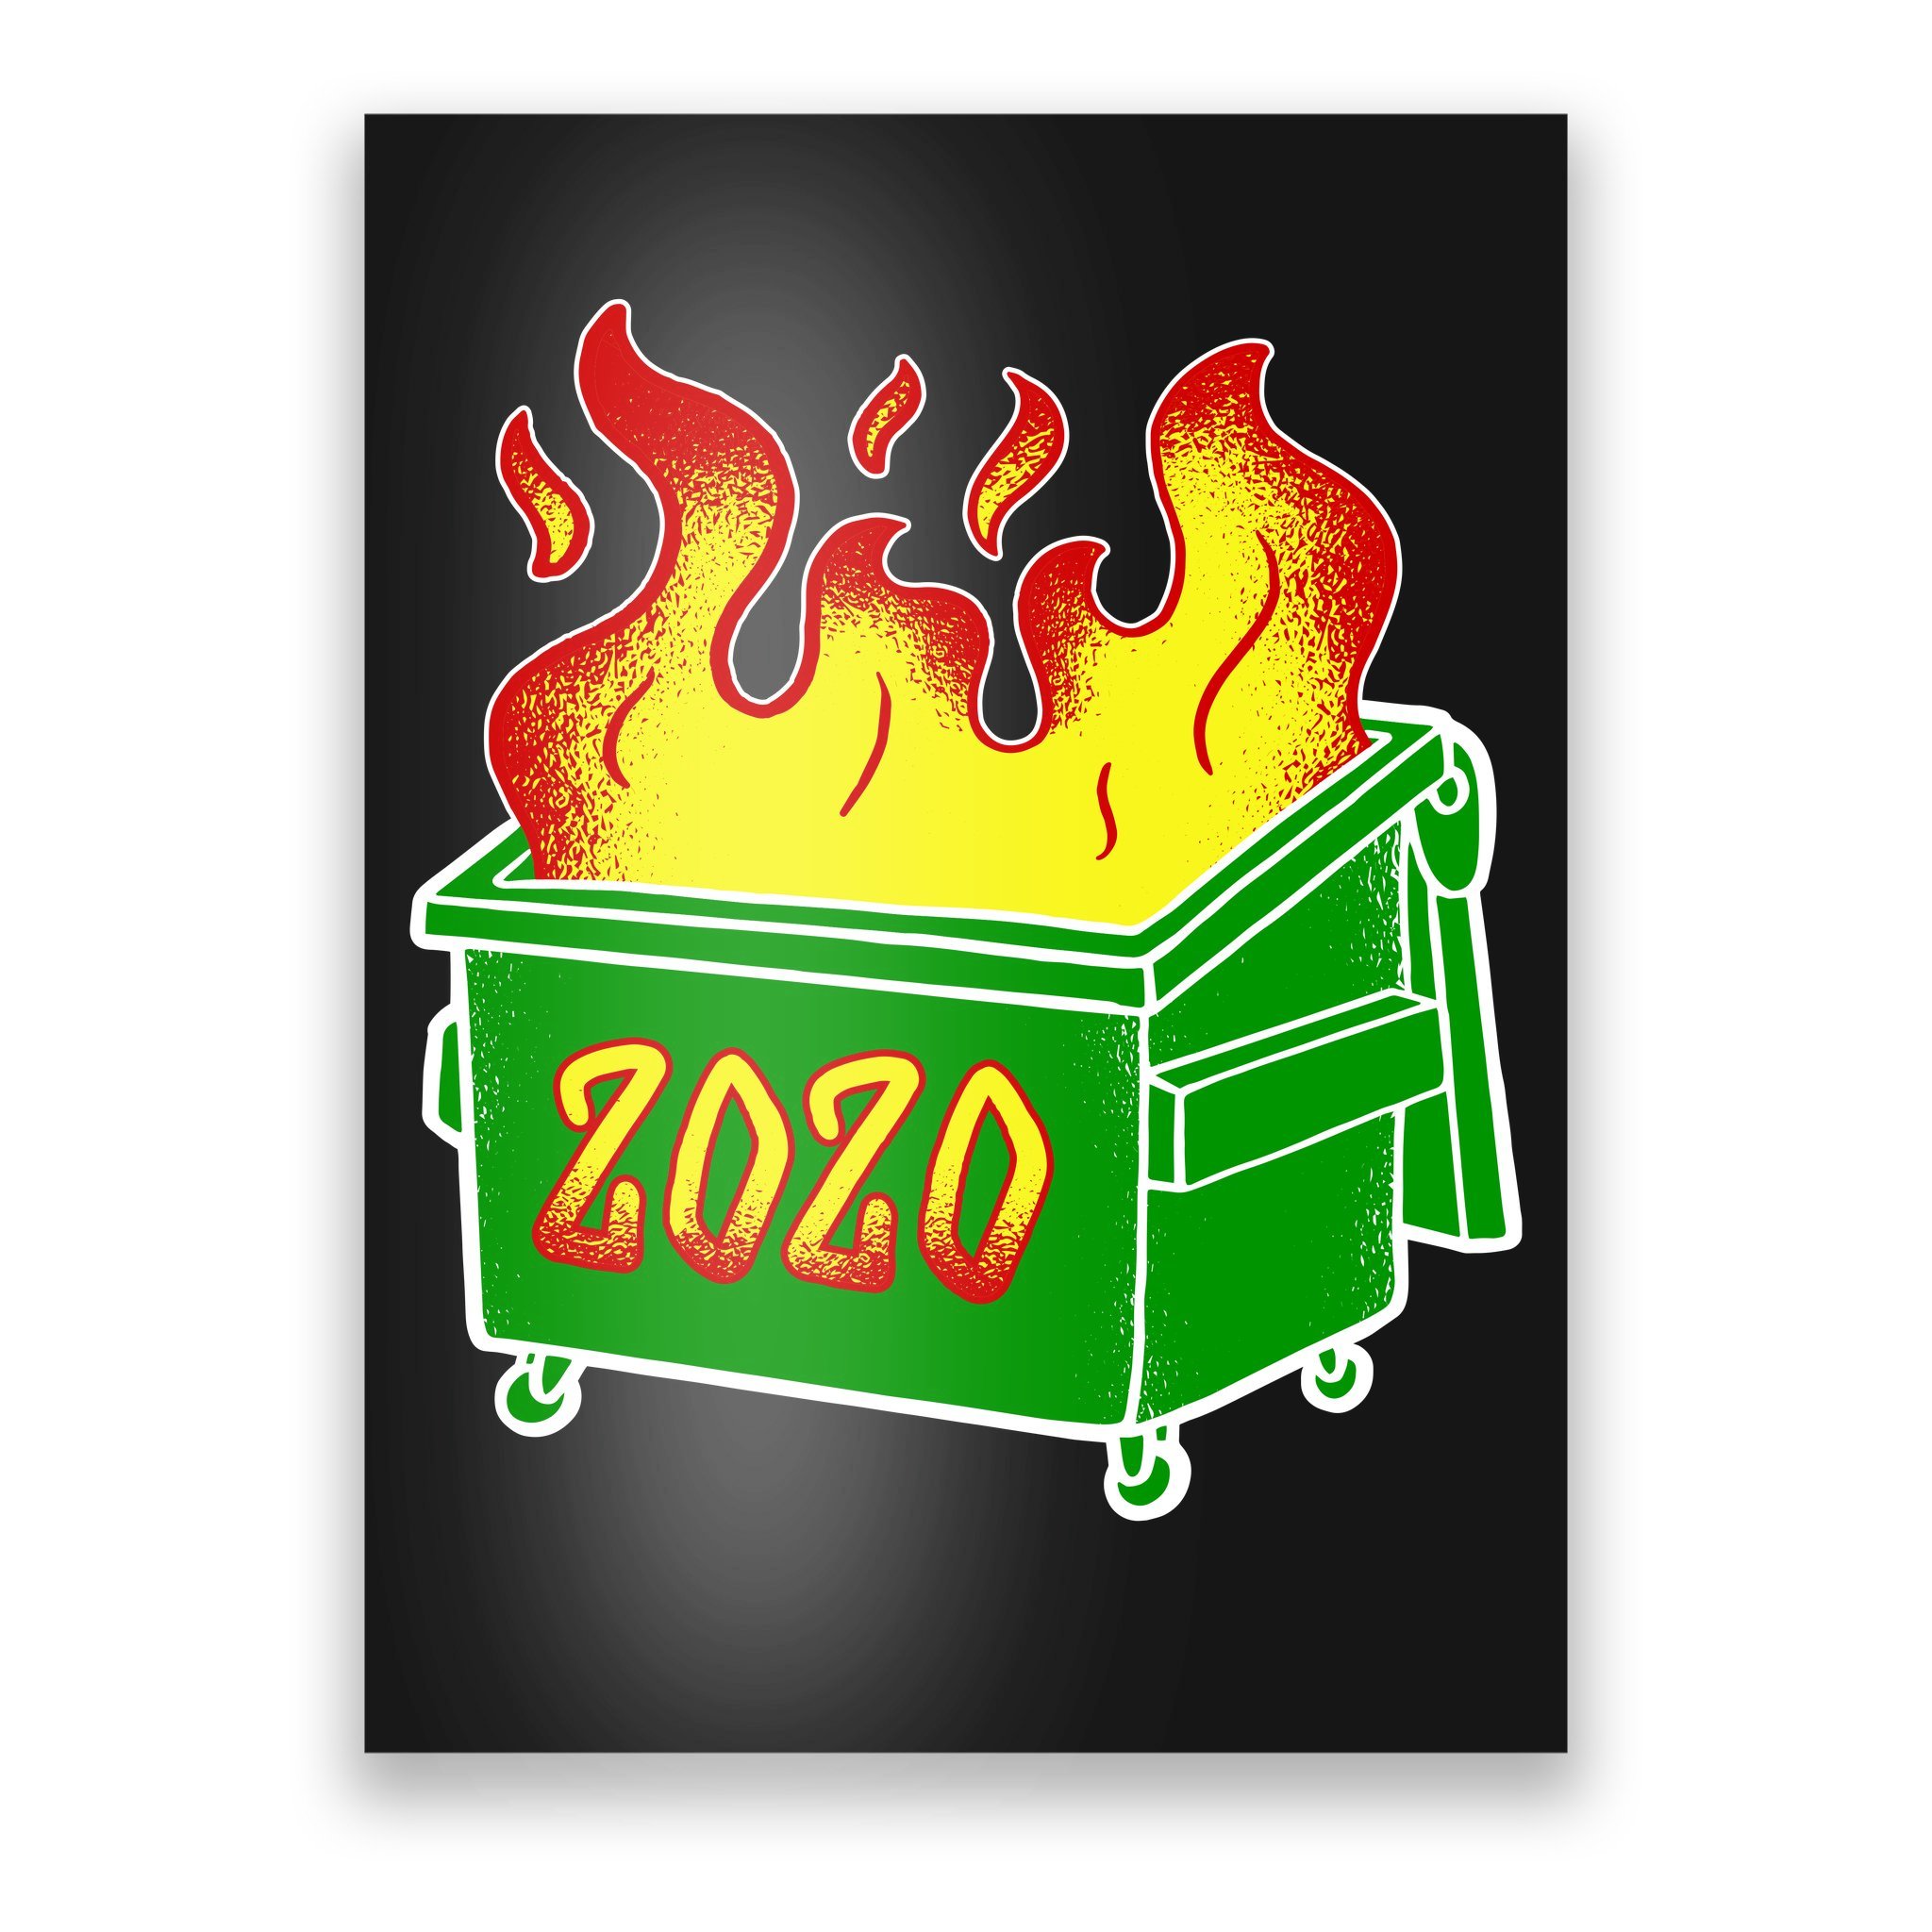 Free dumpster fire clipart, Download Free dumpster fire clipart png ...